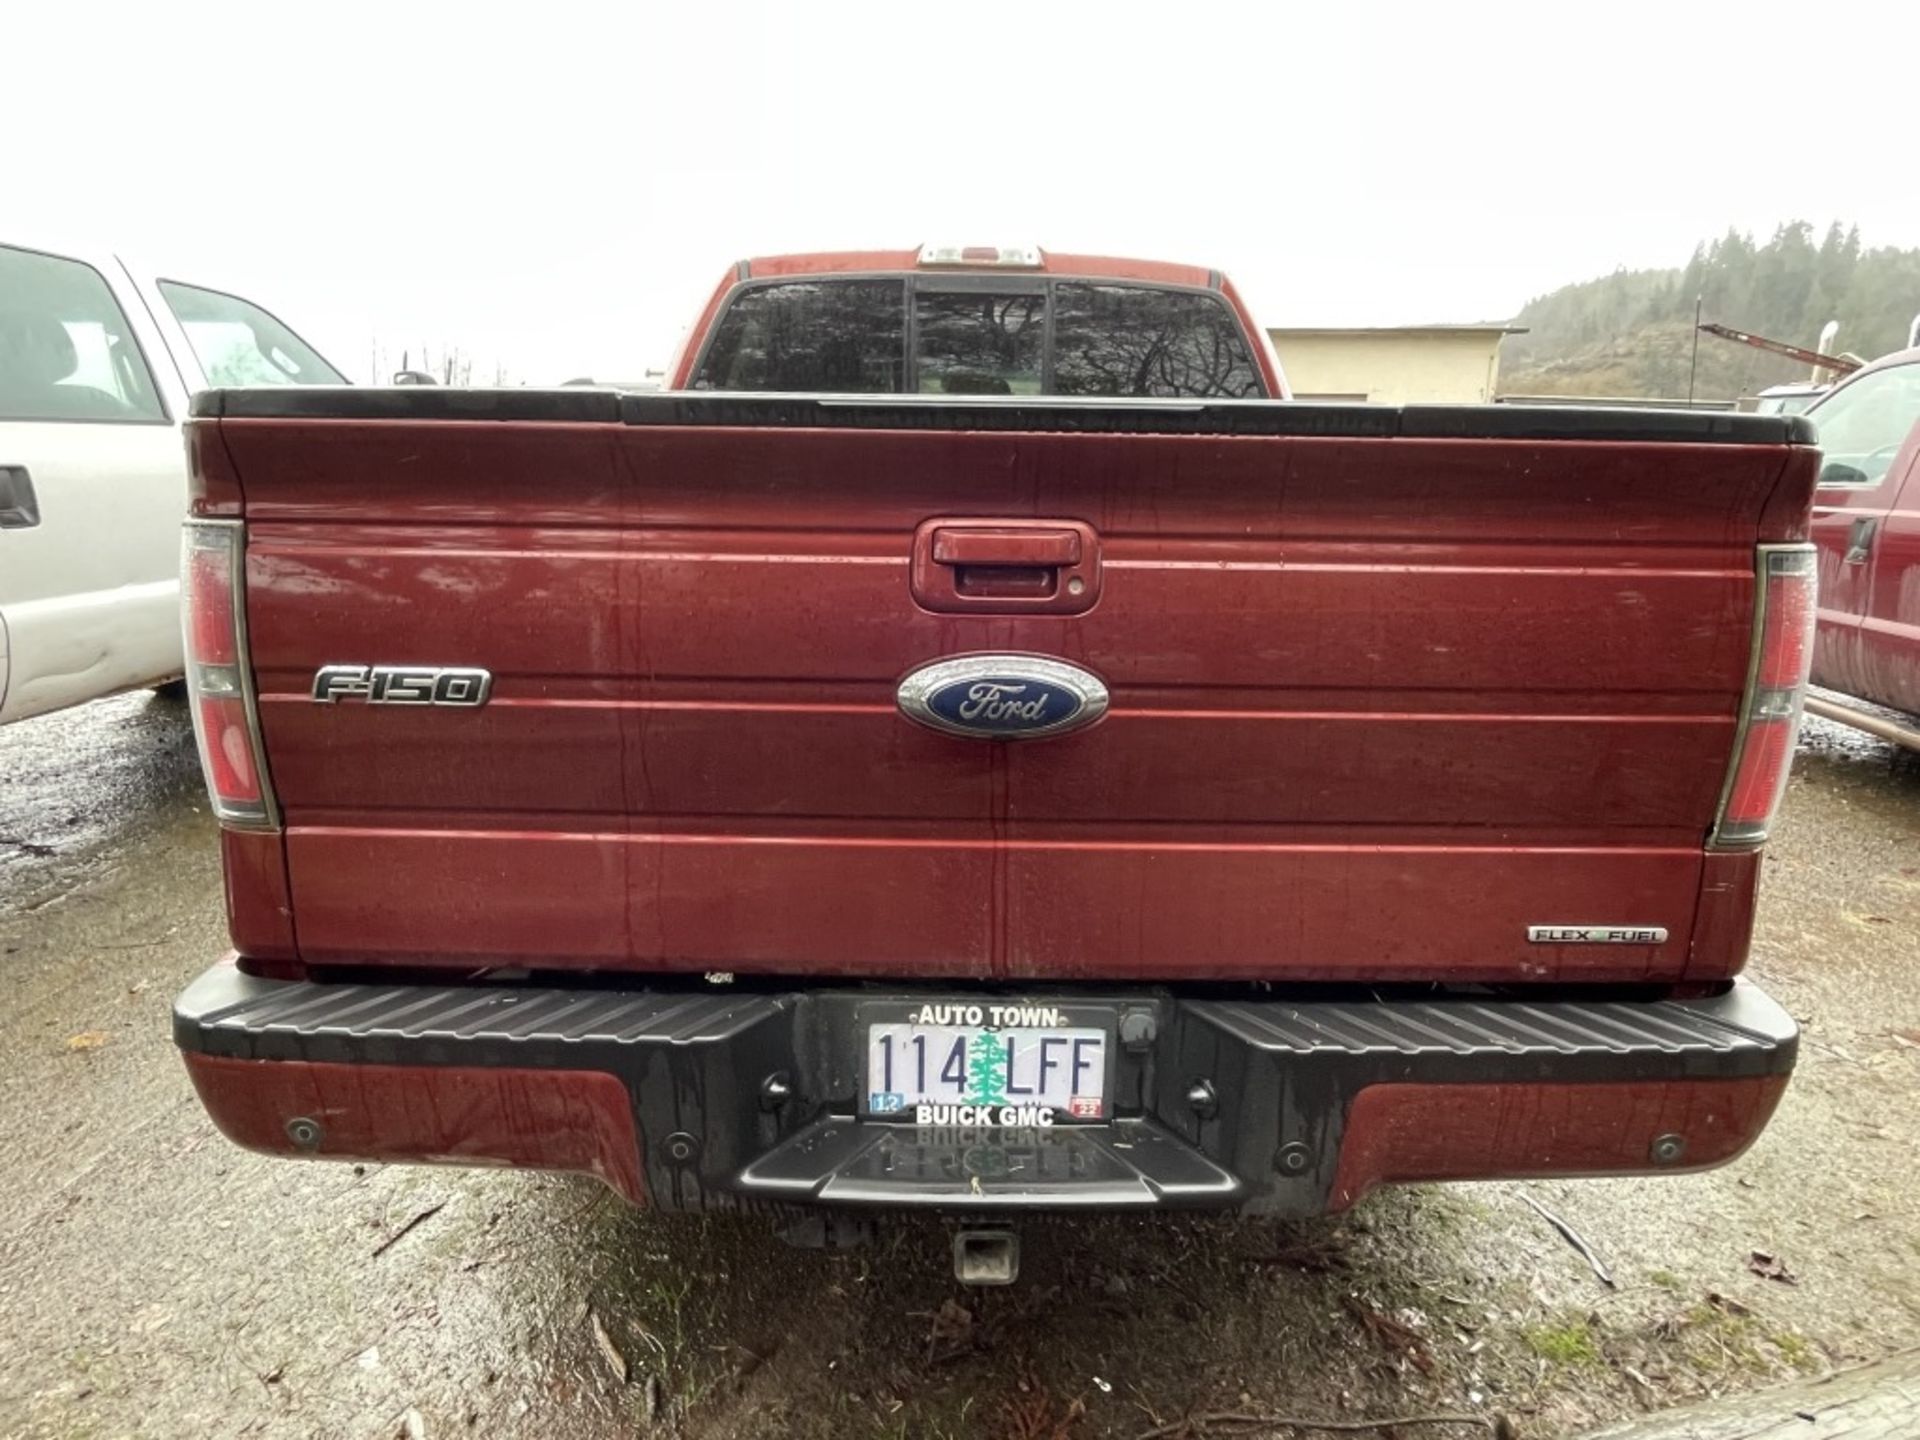 2014 Ford F150 Crew Cab Pickup - Image 6 of 17